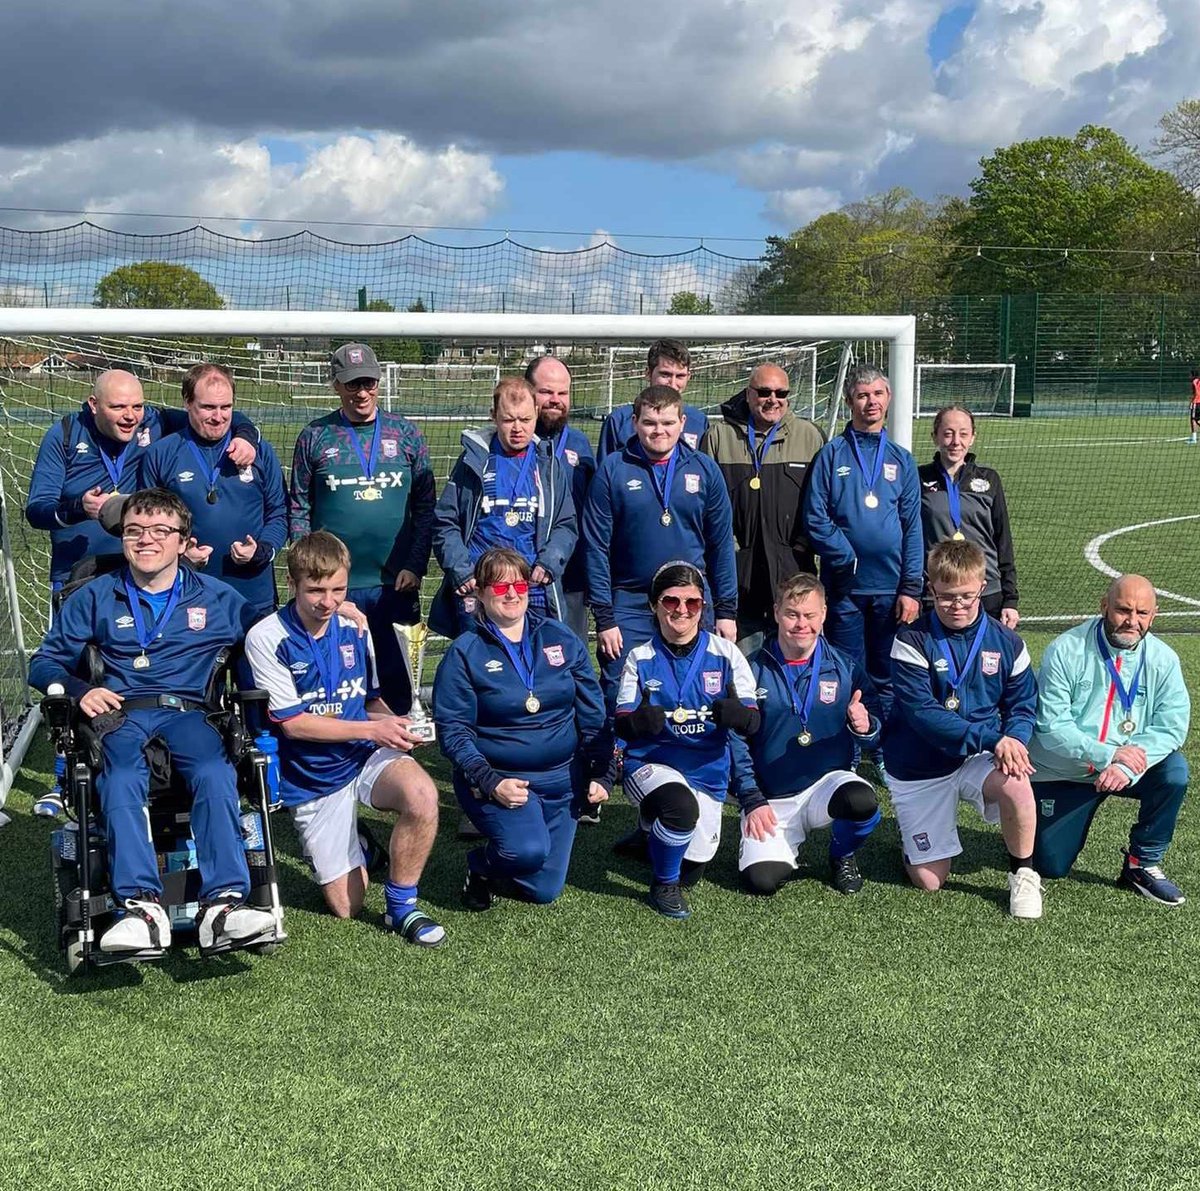 🏆 Our Adult Disability team won all five of their fixtures today, making them champions of their league! An incredible achievement! 👏